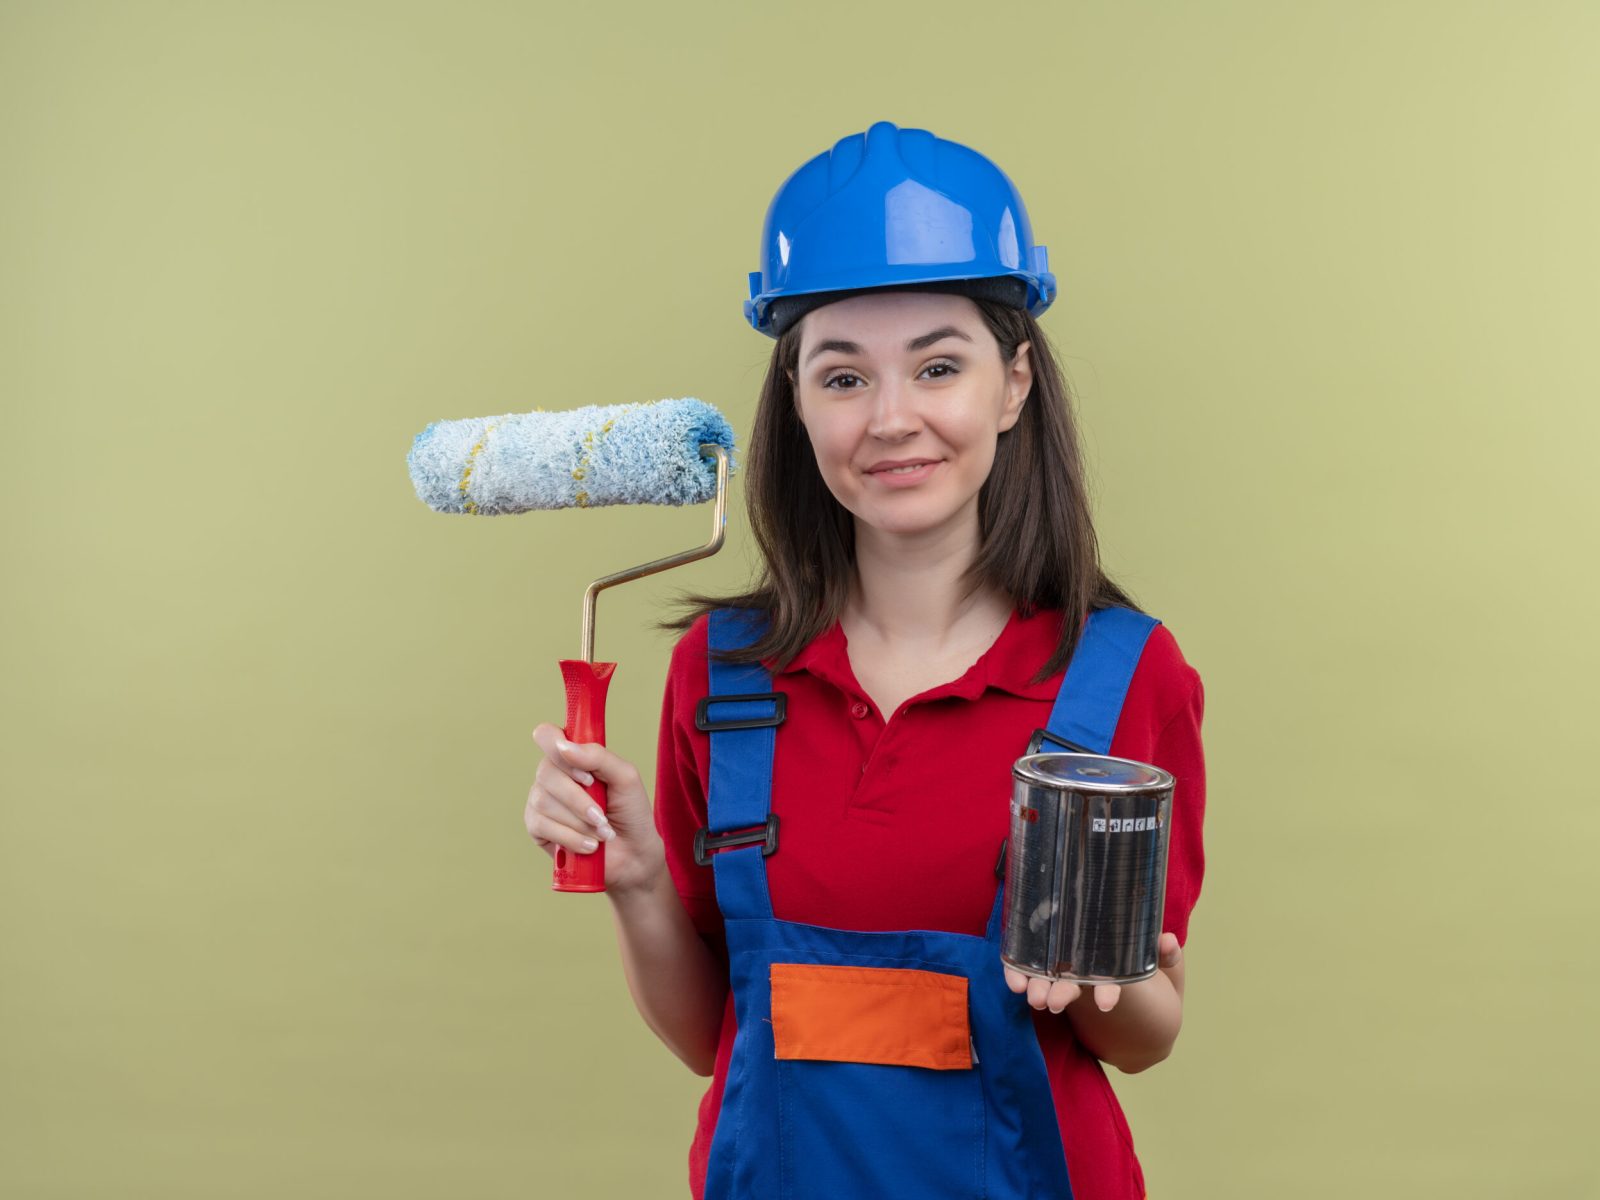 smiling young builder girl with blue safety helmet holds paint roller and paint on isolated green background